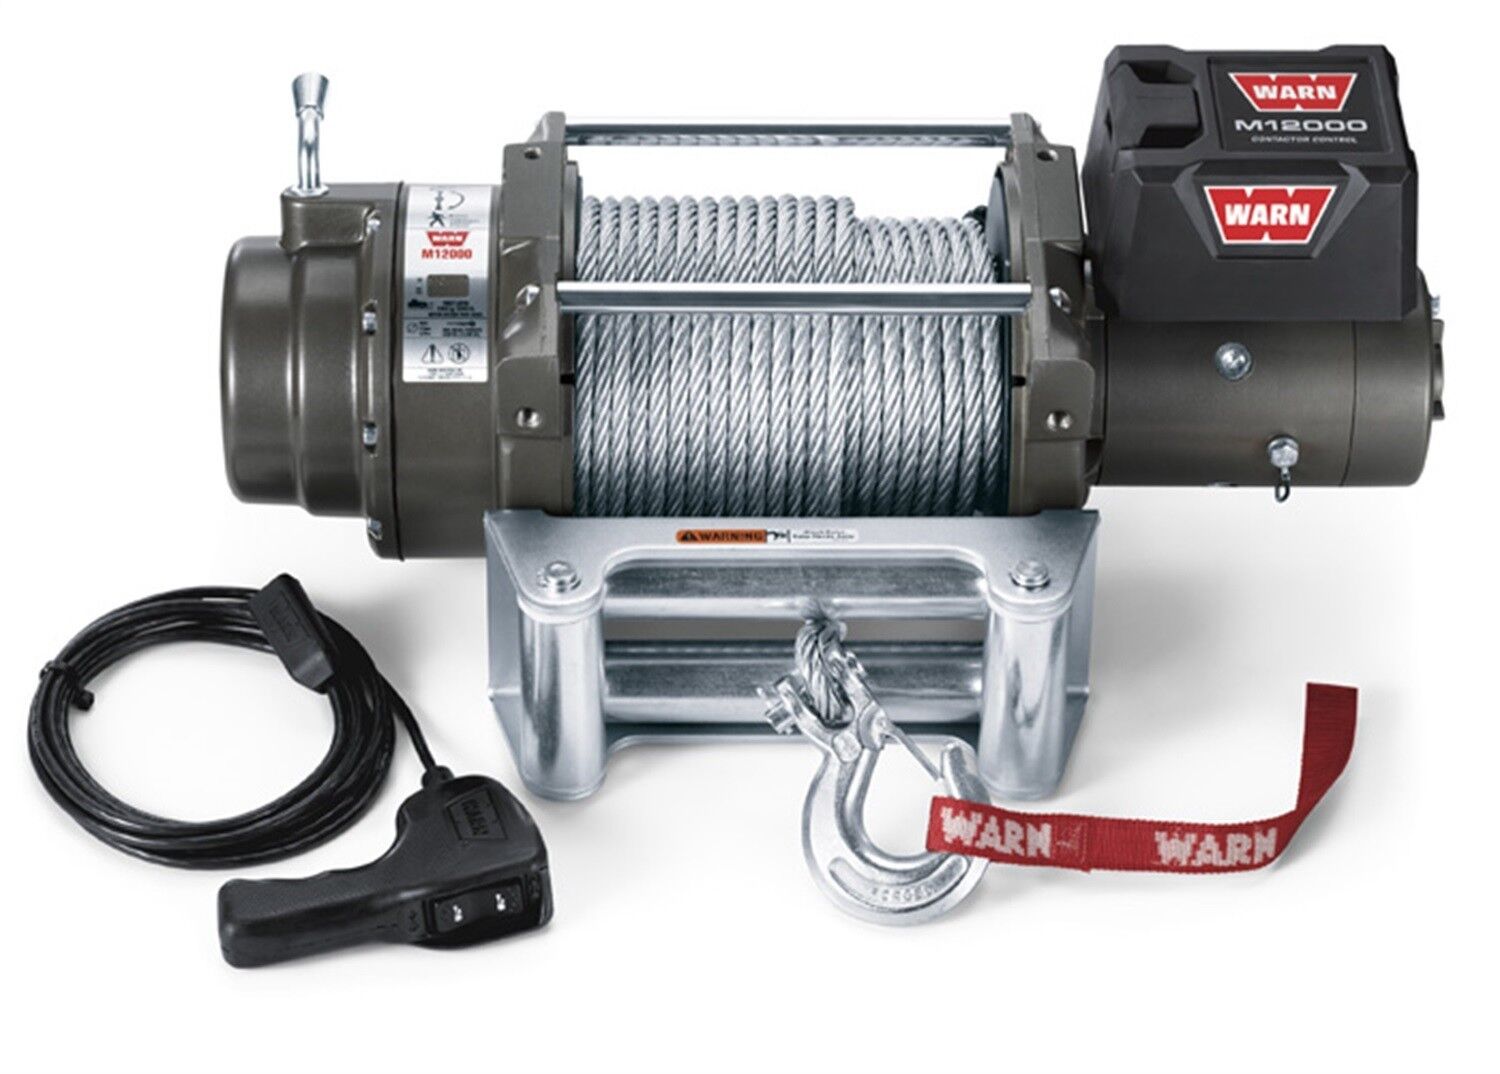 Warn M12000 17801 Heavy Weight Series Winch w/Control & Cable, 12,000 lbs 5400kg